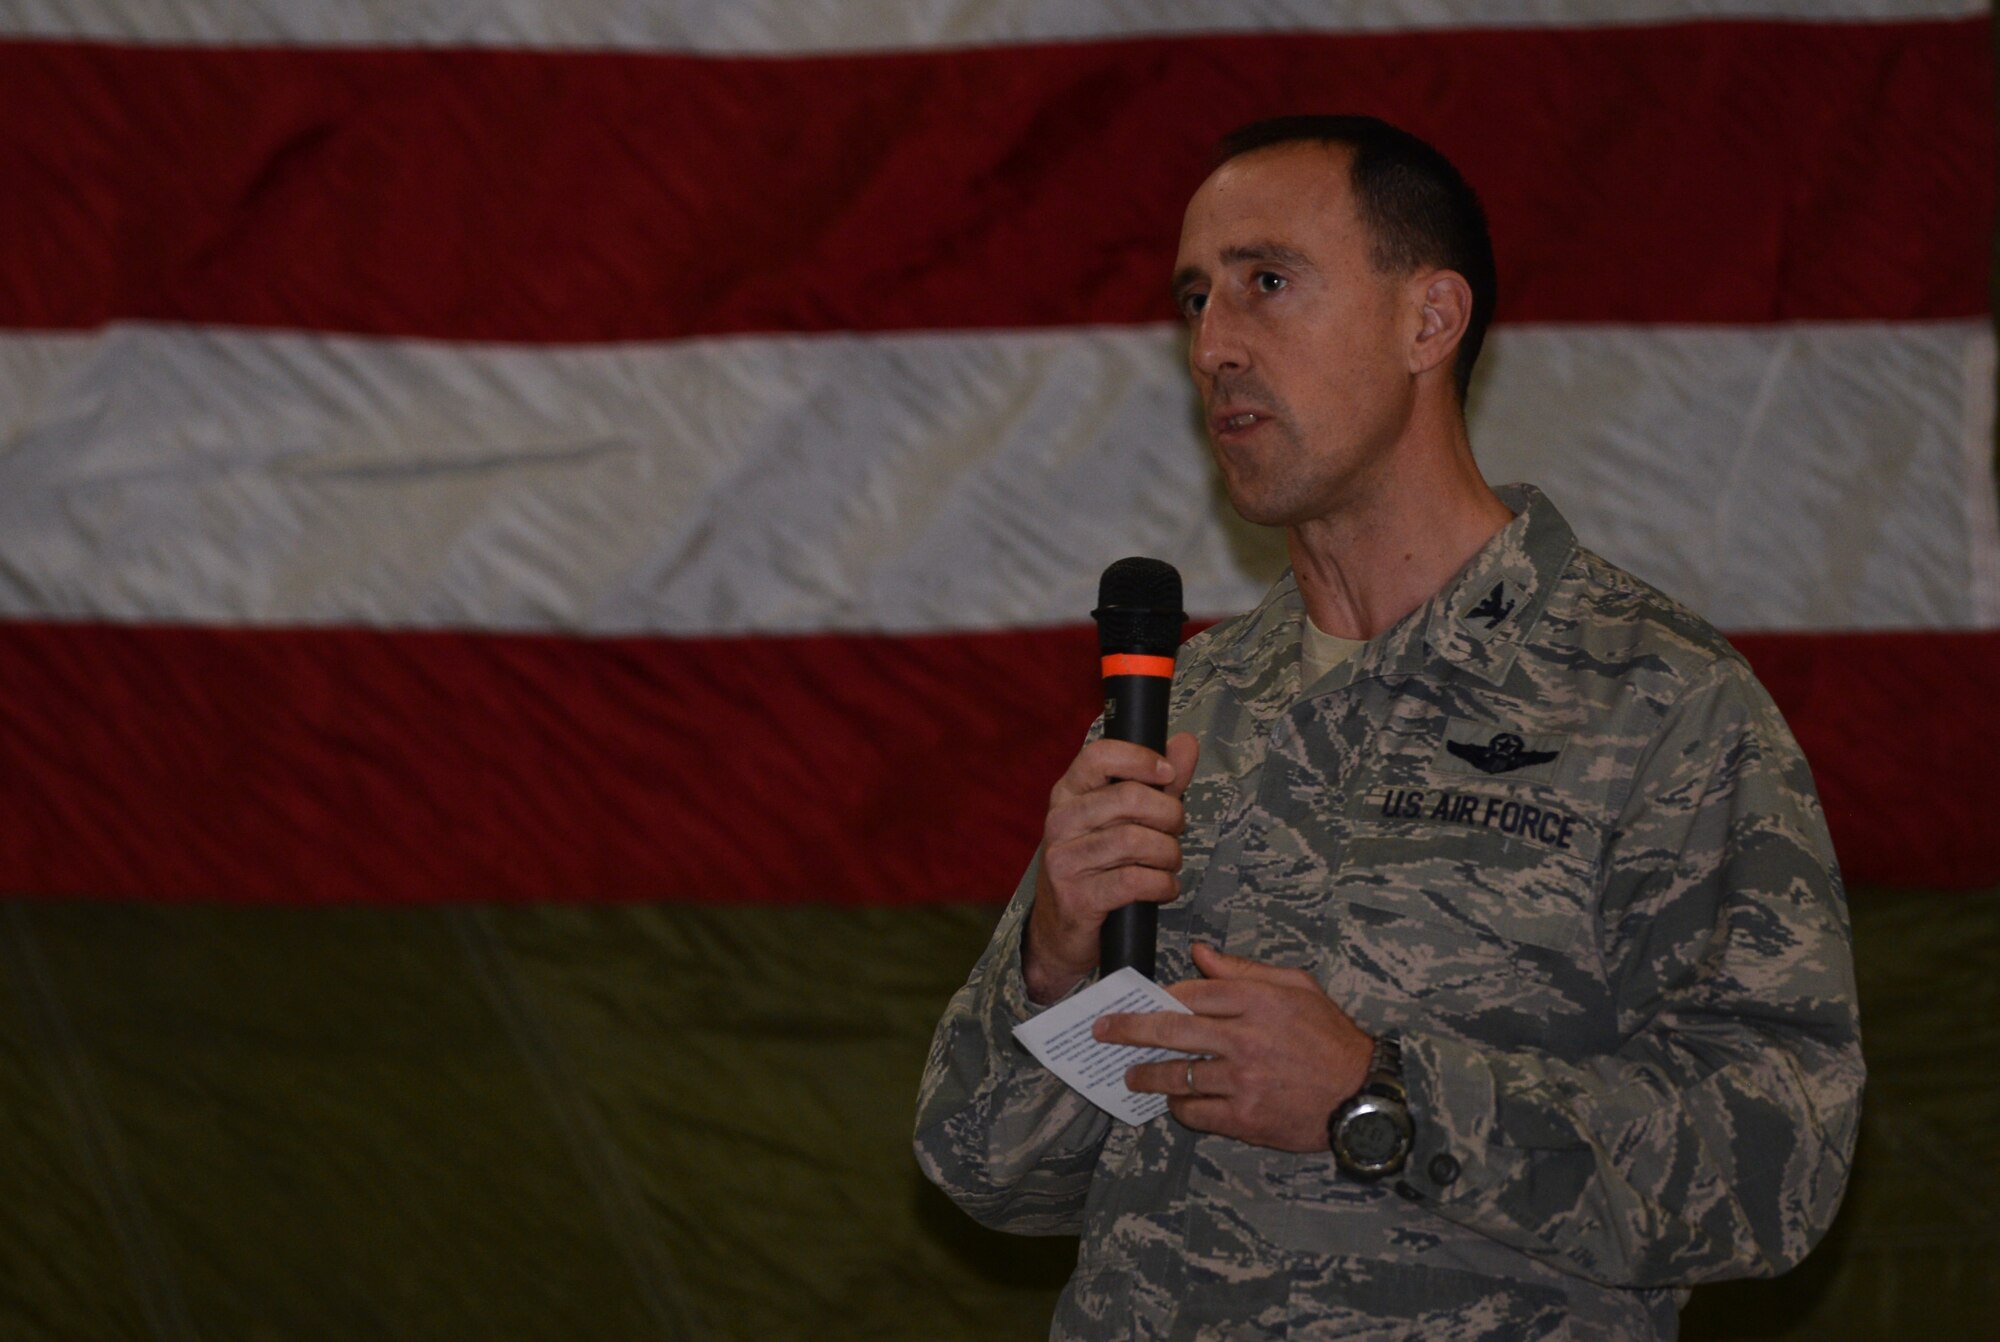 Col. Leonard Kosinski, 62nd Airlift Wing commander congratulates Airmen from the McChord Field Honor Guard at a change or responsibility ceremony Dec. 13, 2016 at Joint Base Lewis-McChord, Wash. The McChord Field Honor Guard serves at ceremonies such as performing military honors as well as presenting the colors across the Pacific Northwest for active duty, retirees and veterans. (U.S. Air Force photo/Senior Airman Jacob Jimenez) 